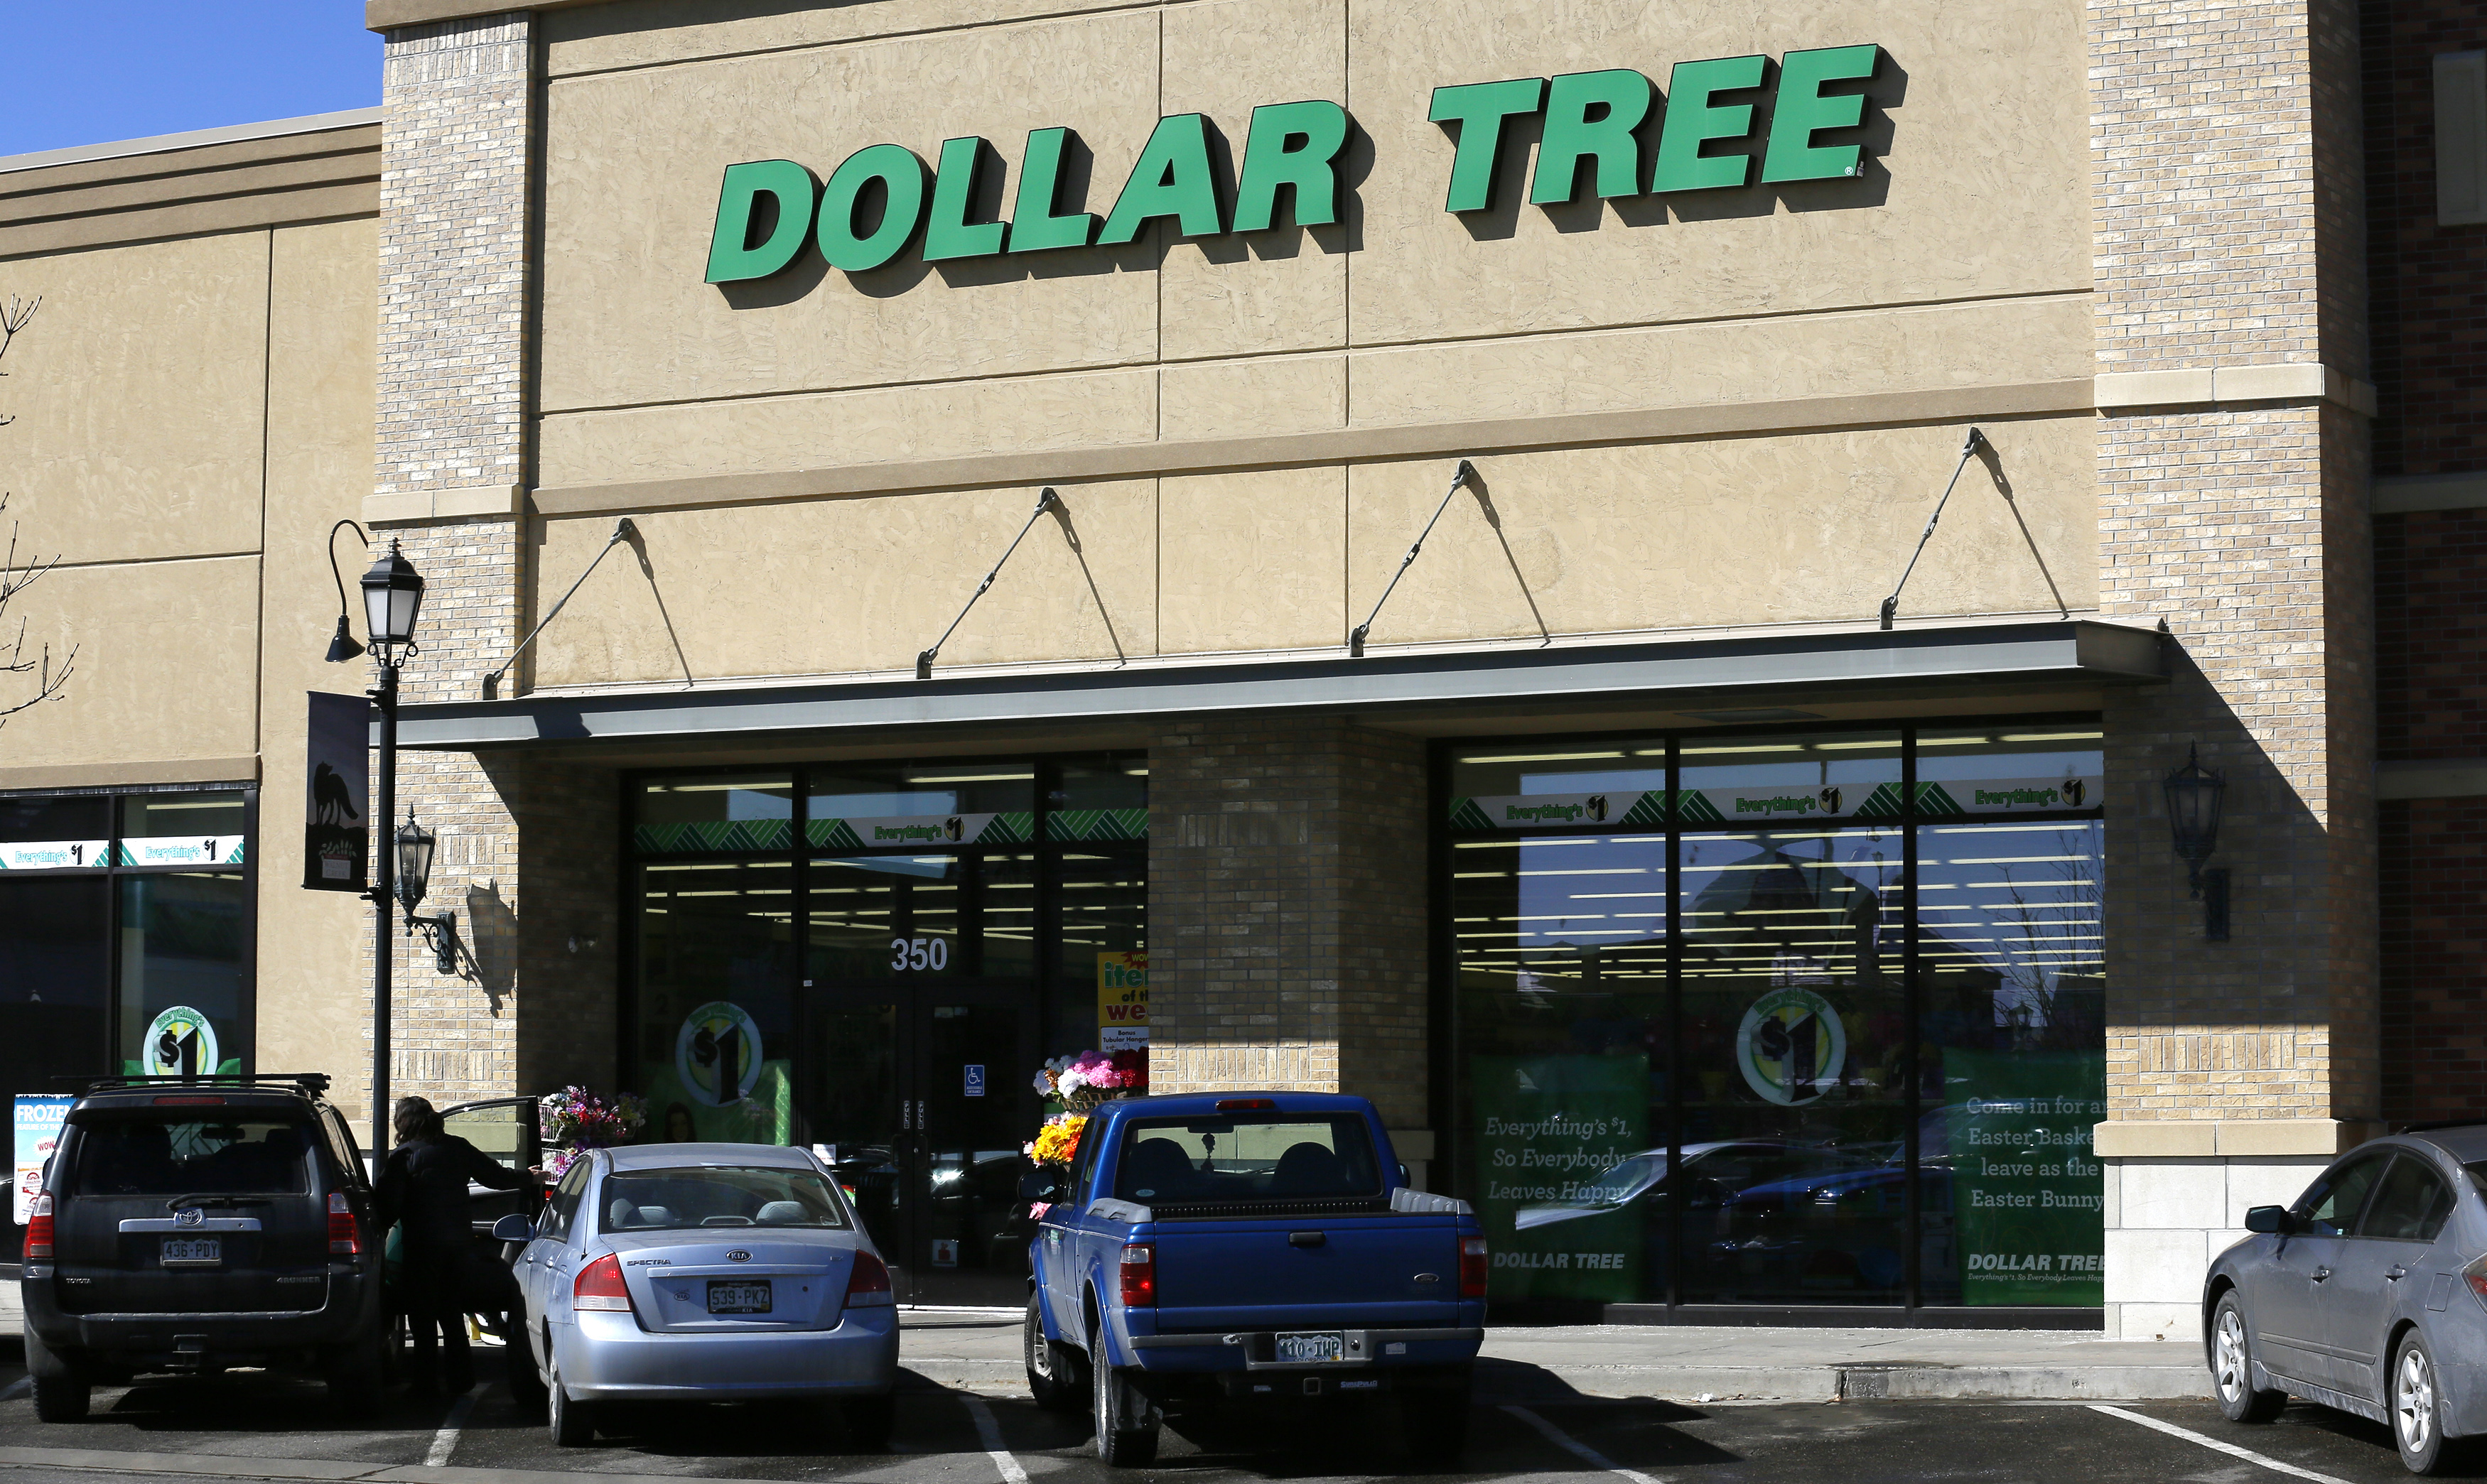 The exterior of a Dollar Tree store in Westminster, Colorado on February 26, 2014. (Rick Wilking—Reuters)